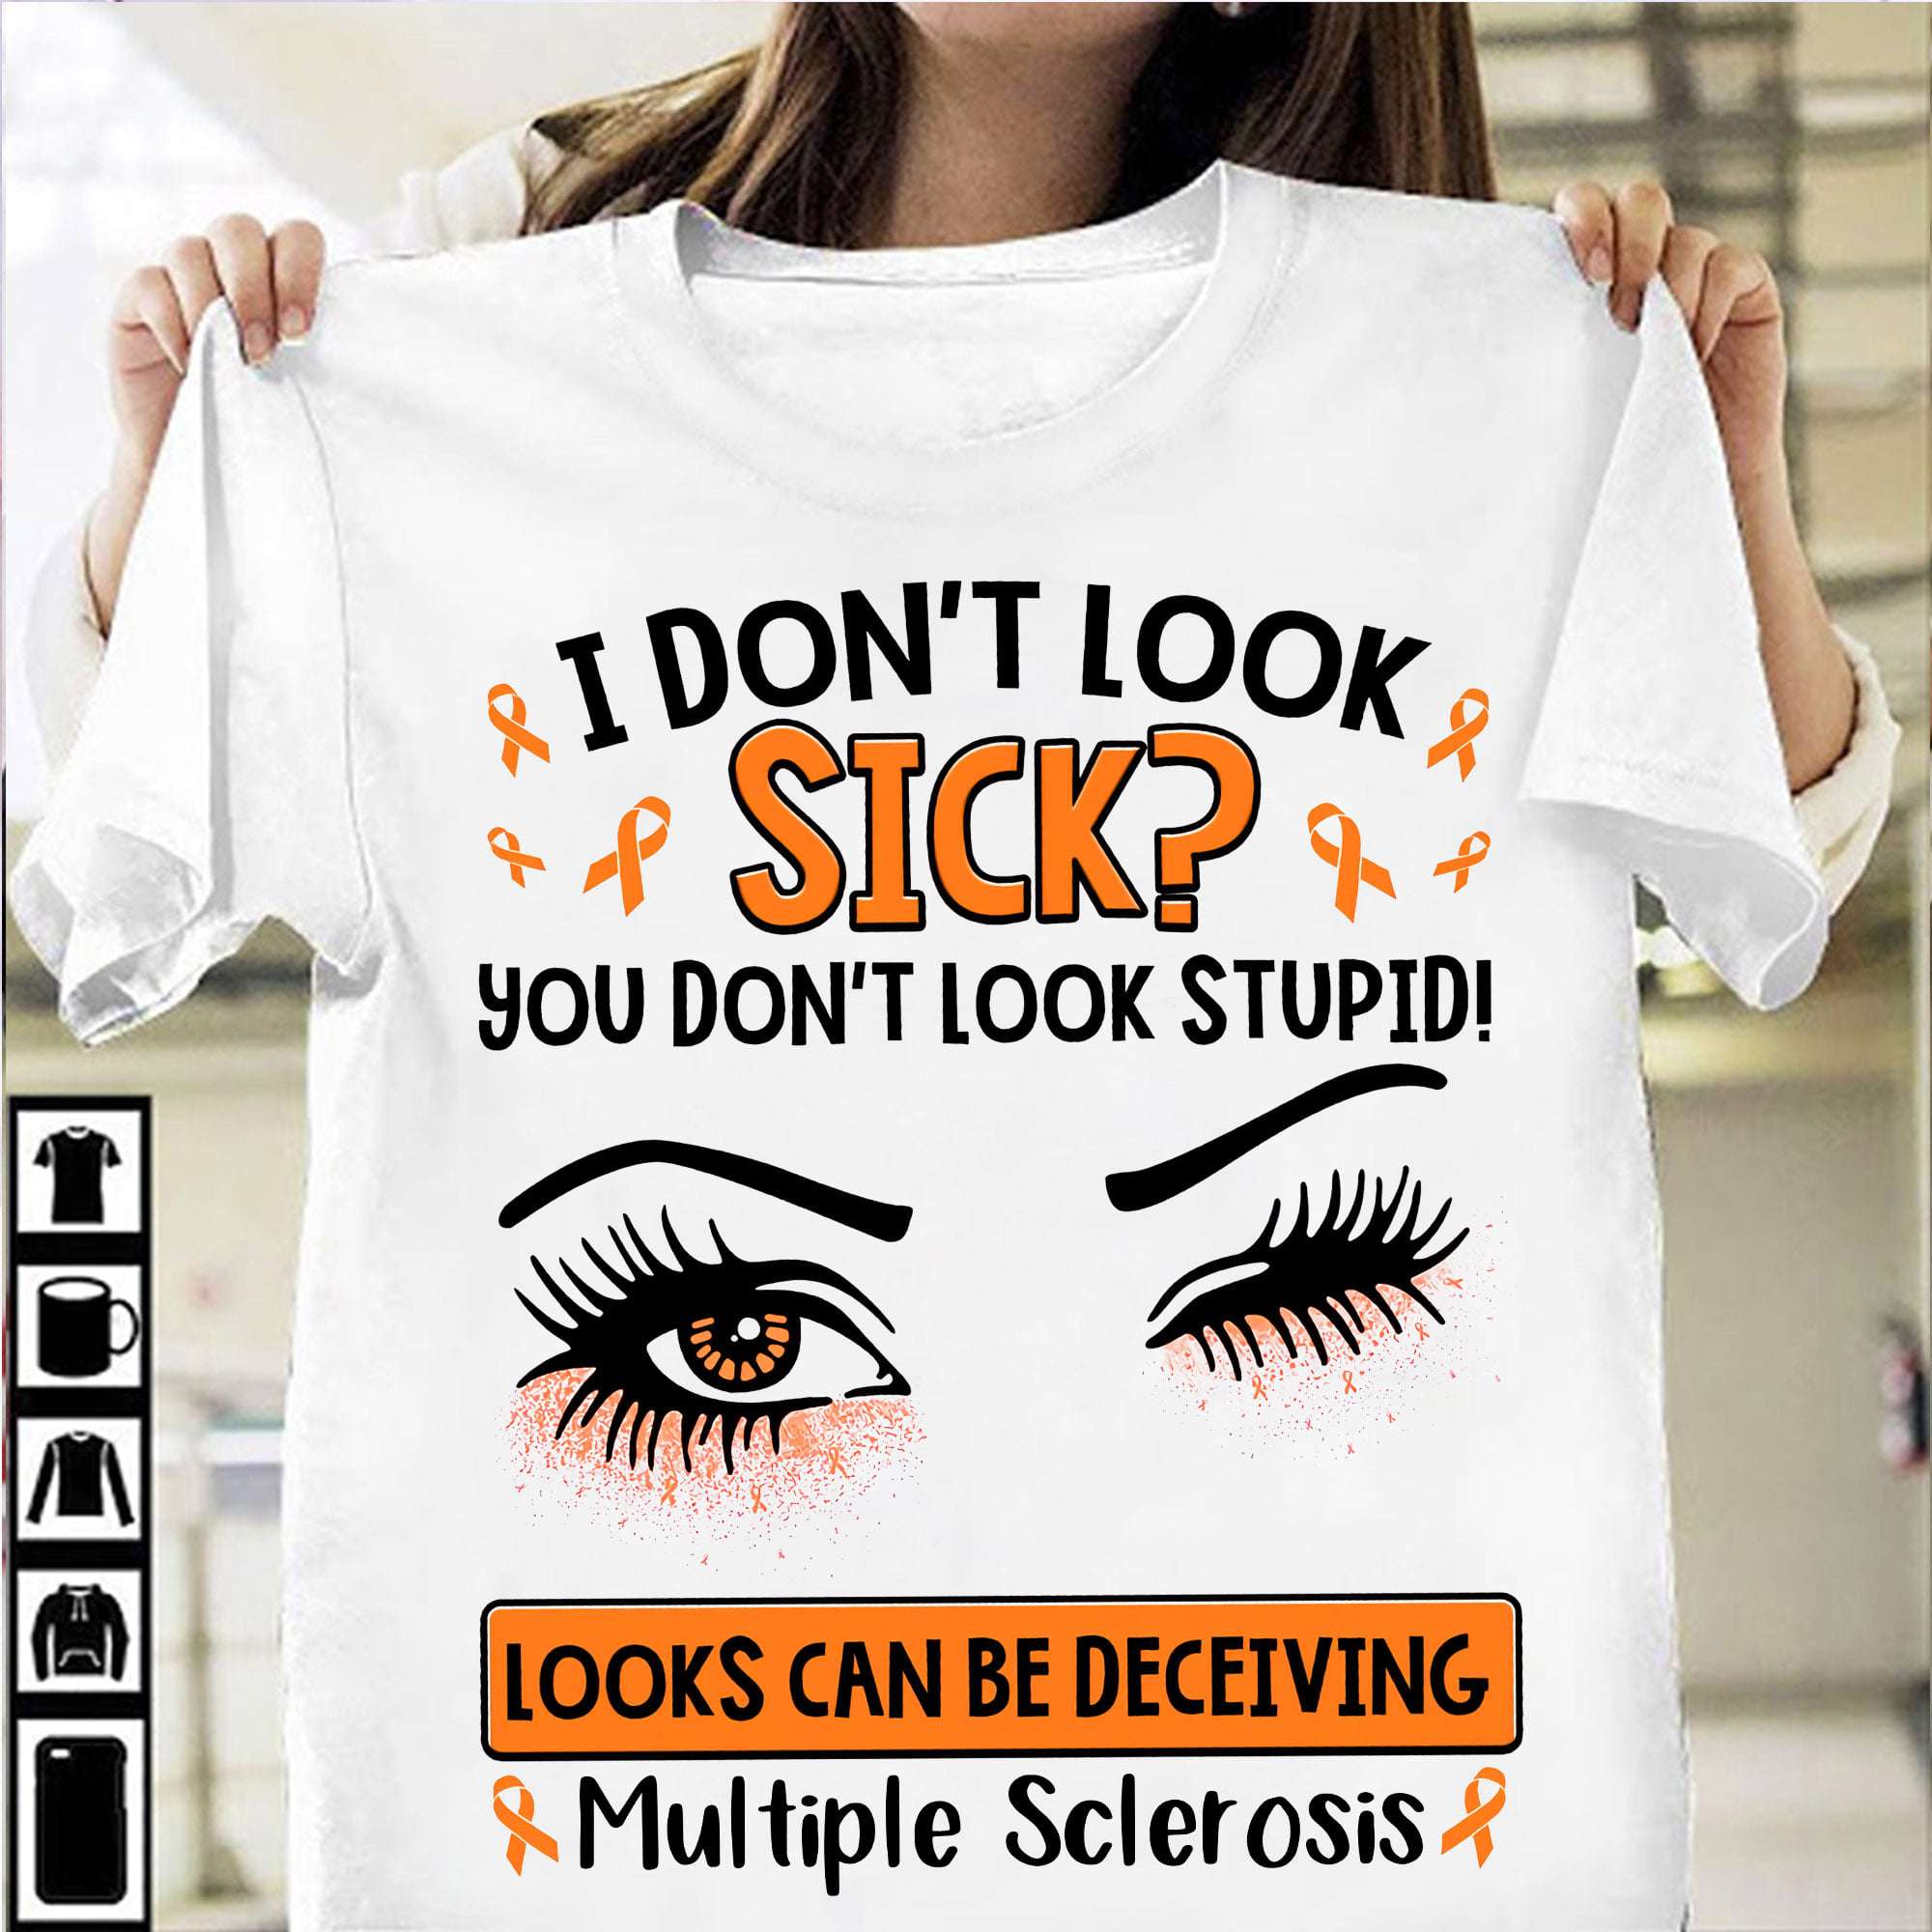 Multiple Sclerosis Warrior - I don't look sick? You don't look stupid looks can be deceiving